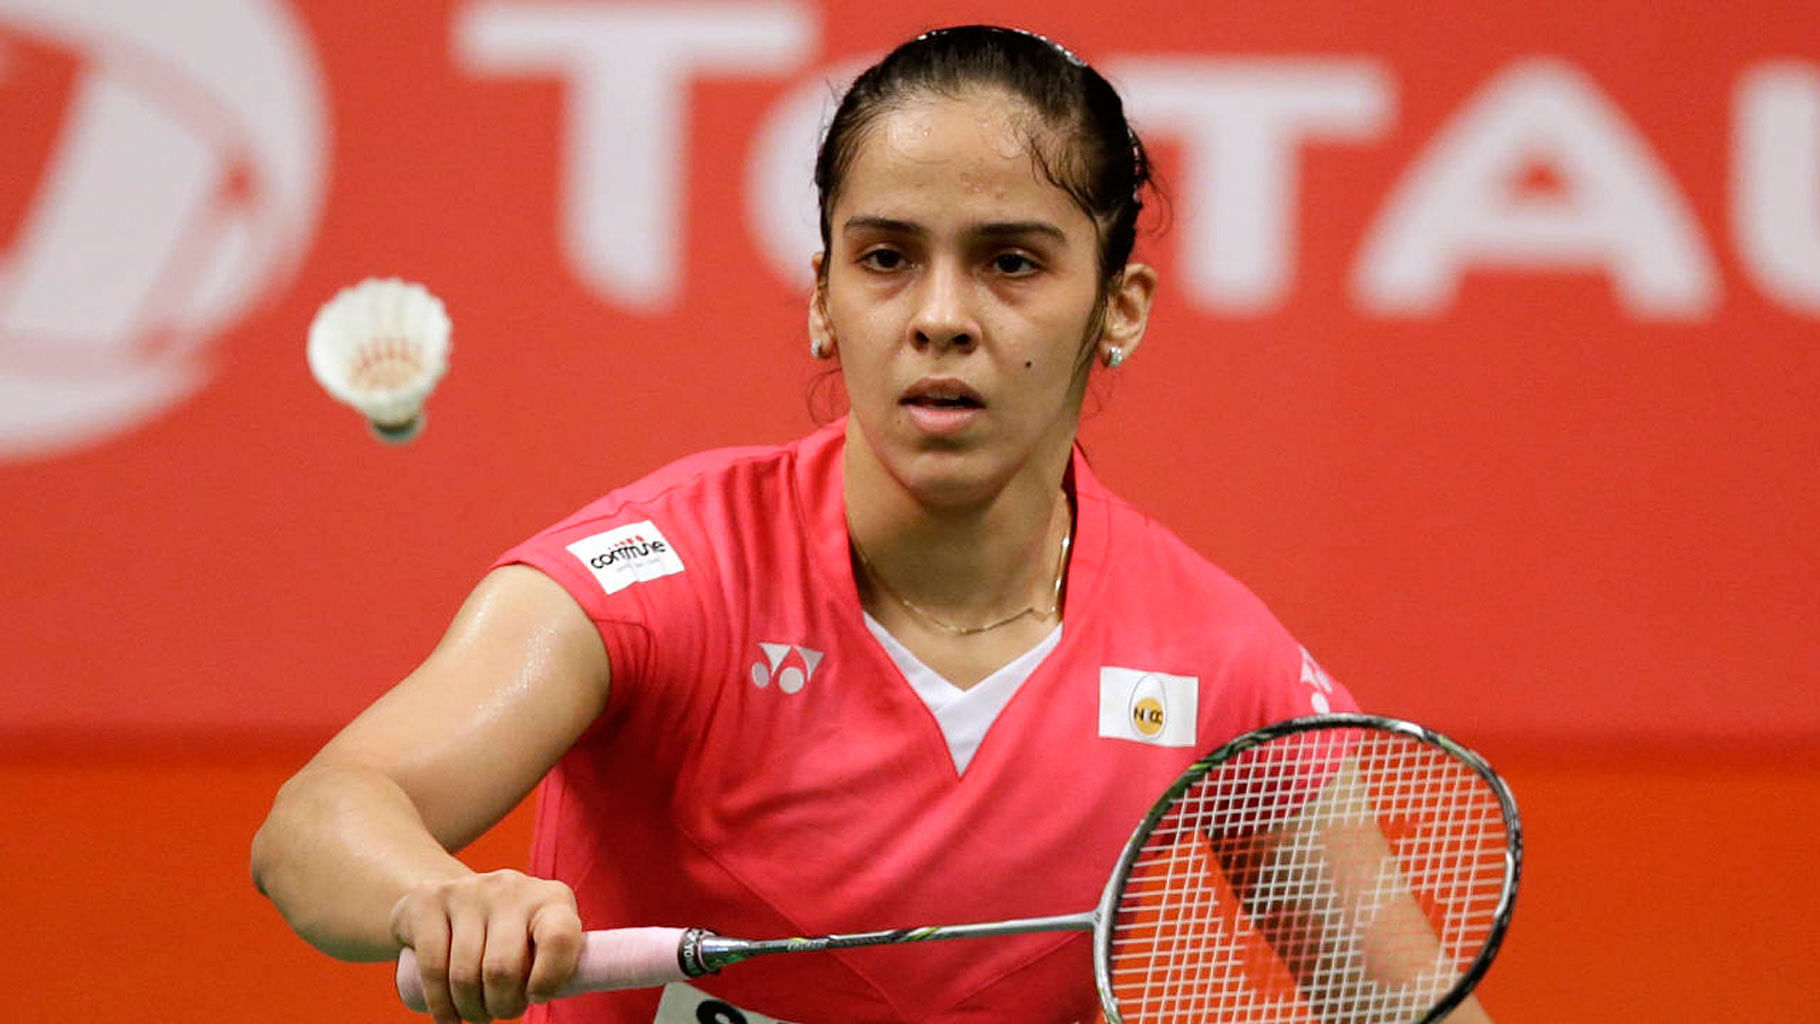 Knee Surgery May Keep Saina Nehwal Out Of Action For 4 Months